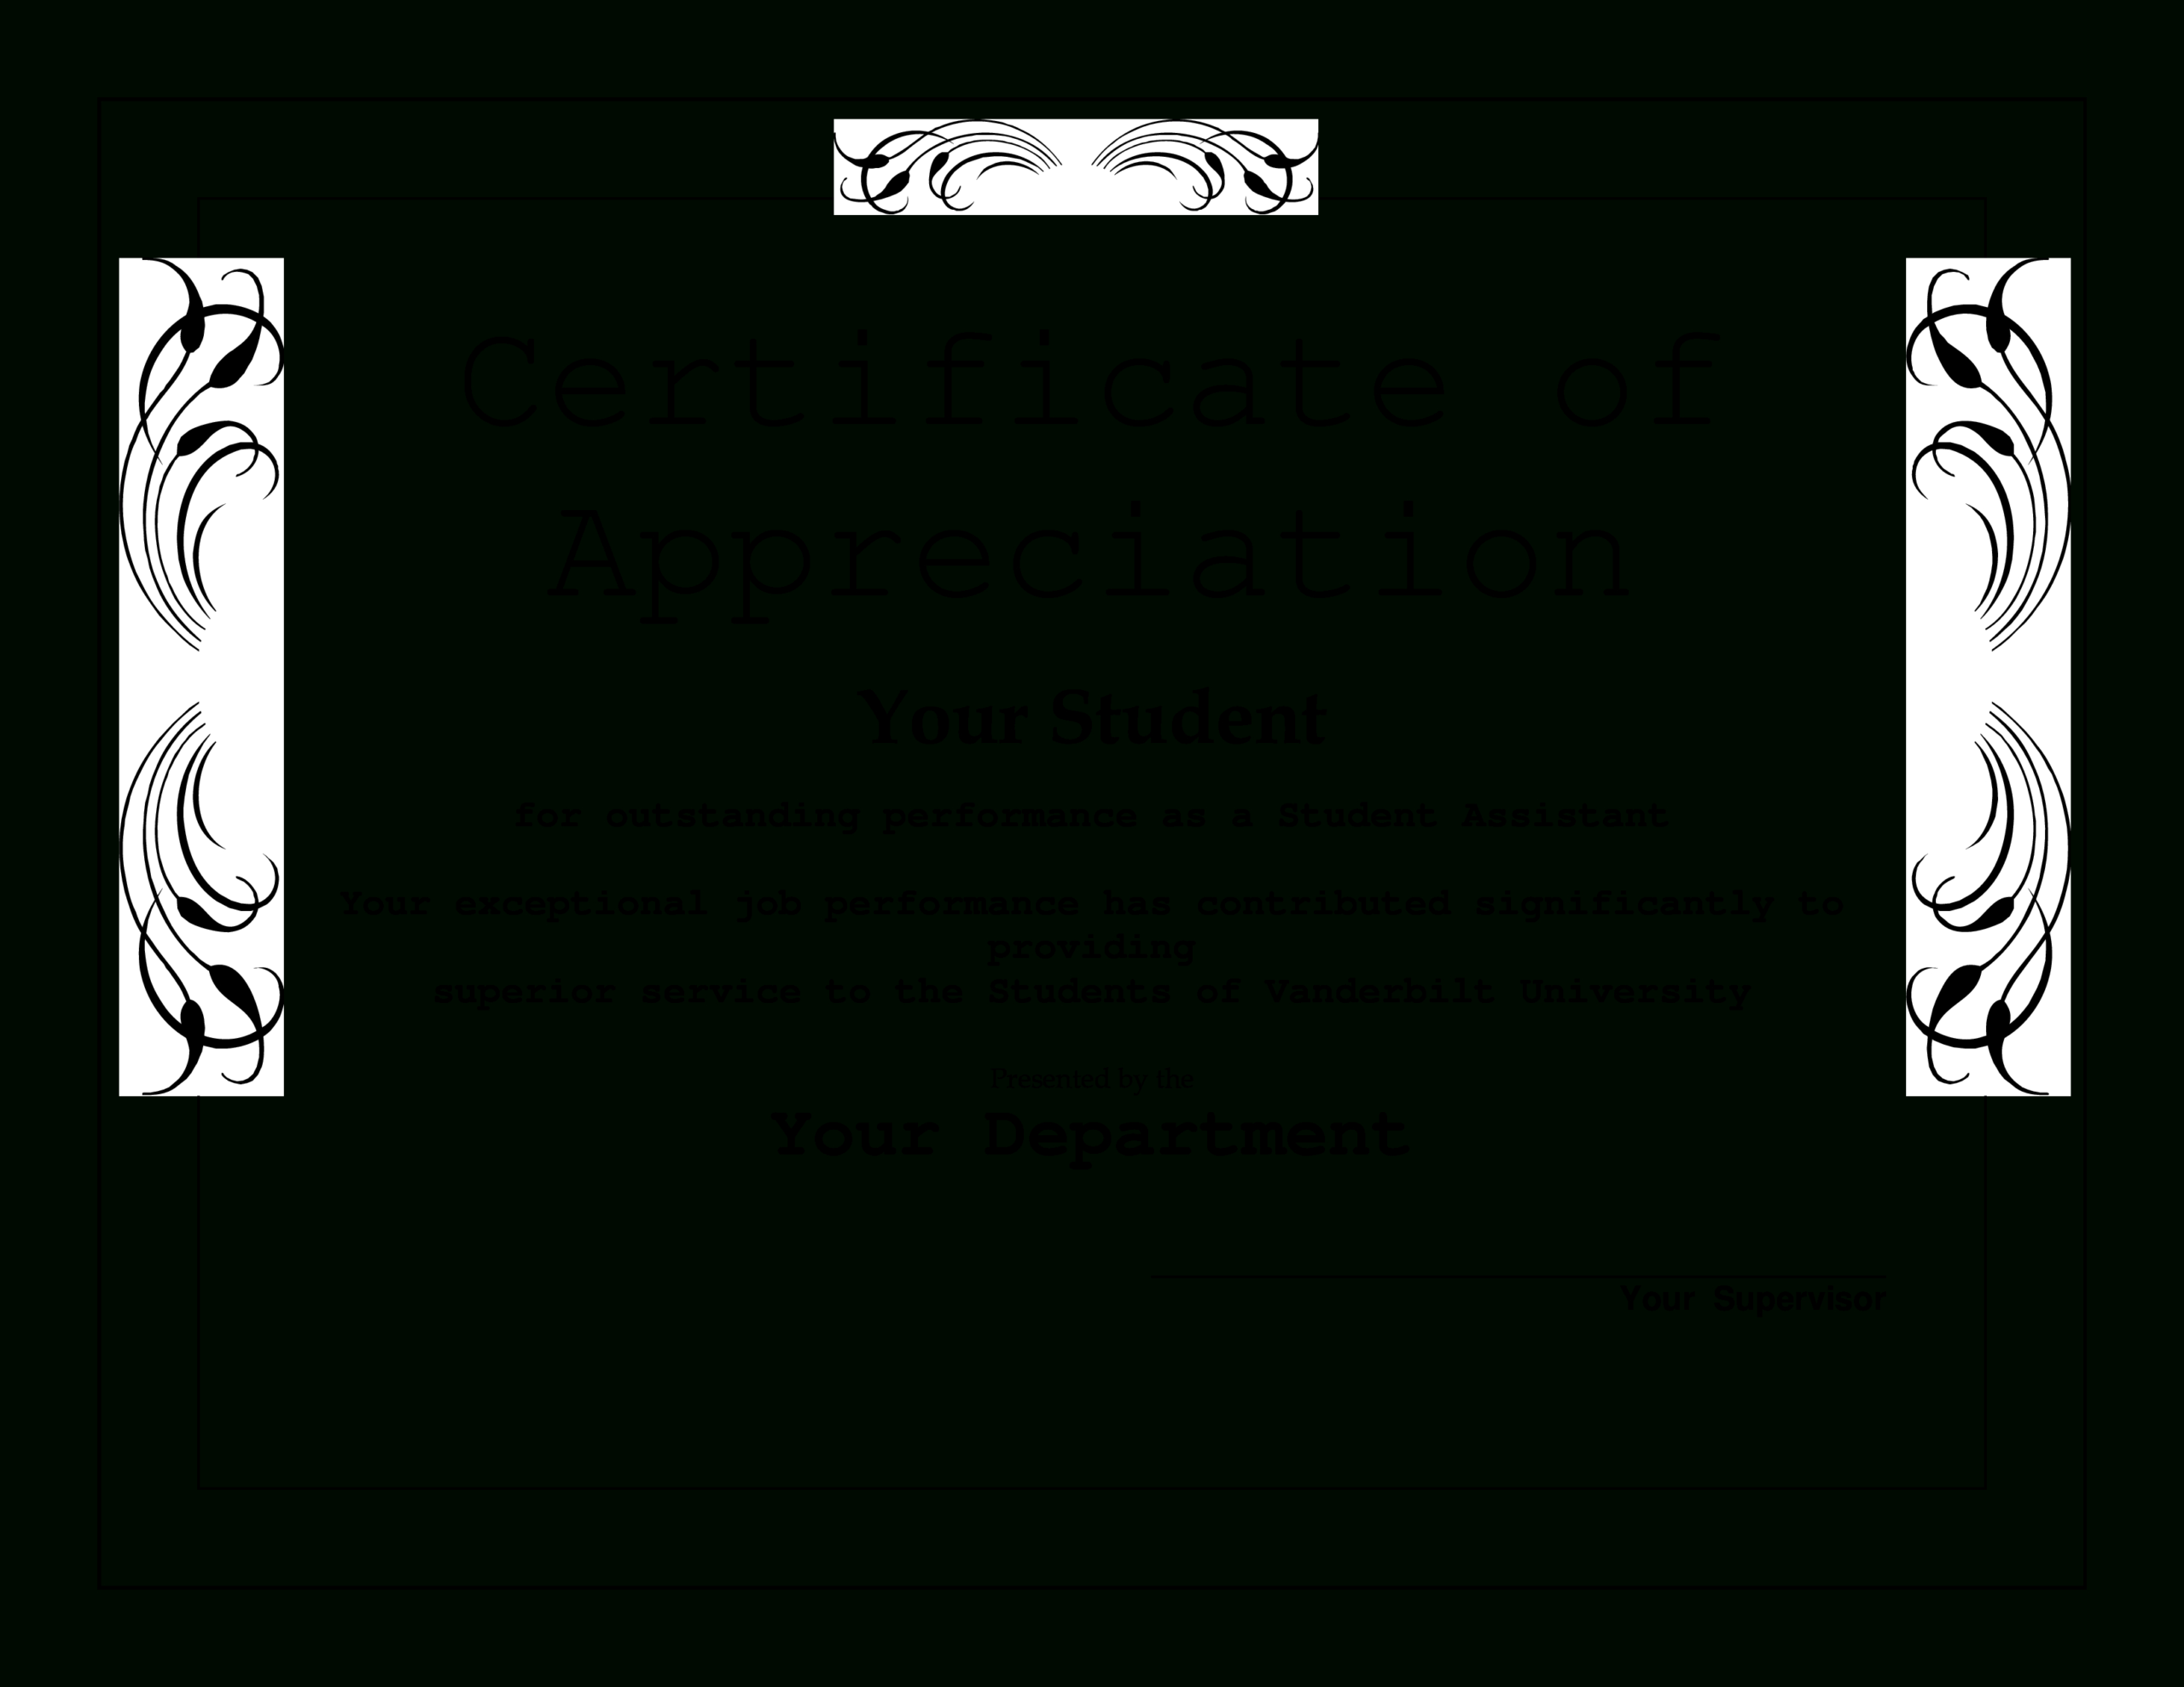 Student Appreciation Award | Templates At Pertaining To Student Of The Year Award Certificate Templates